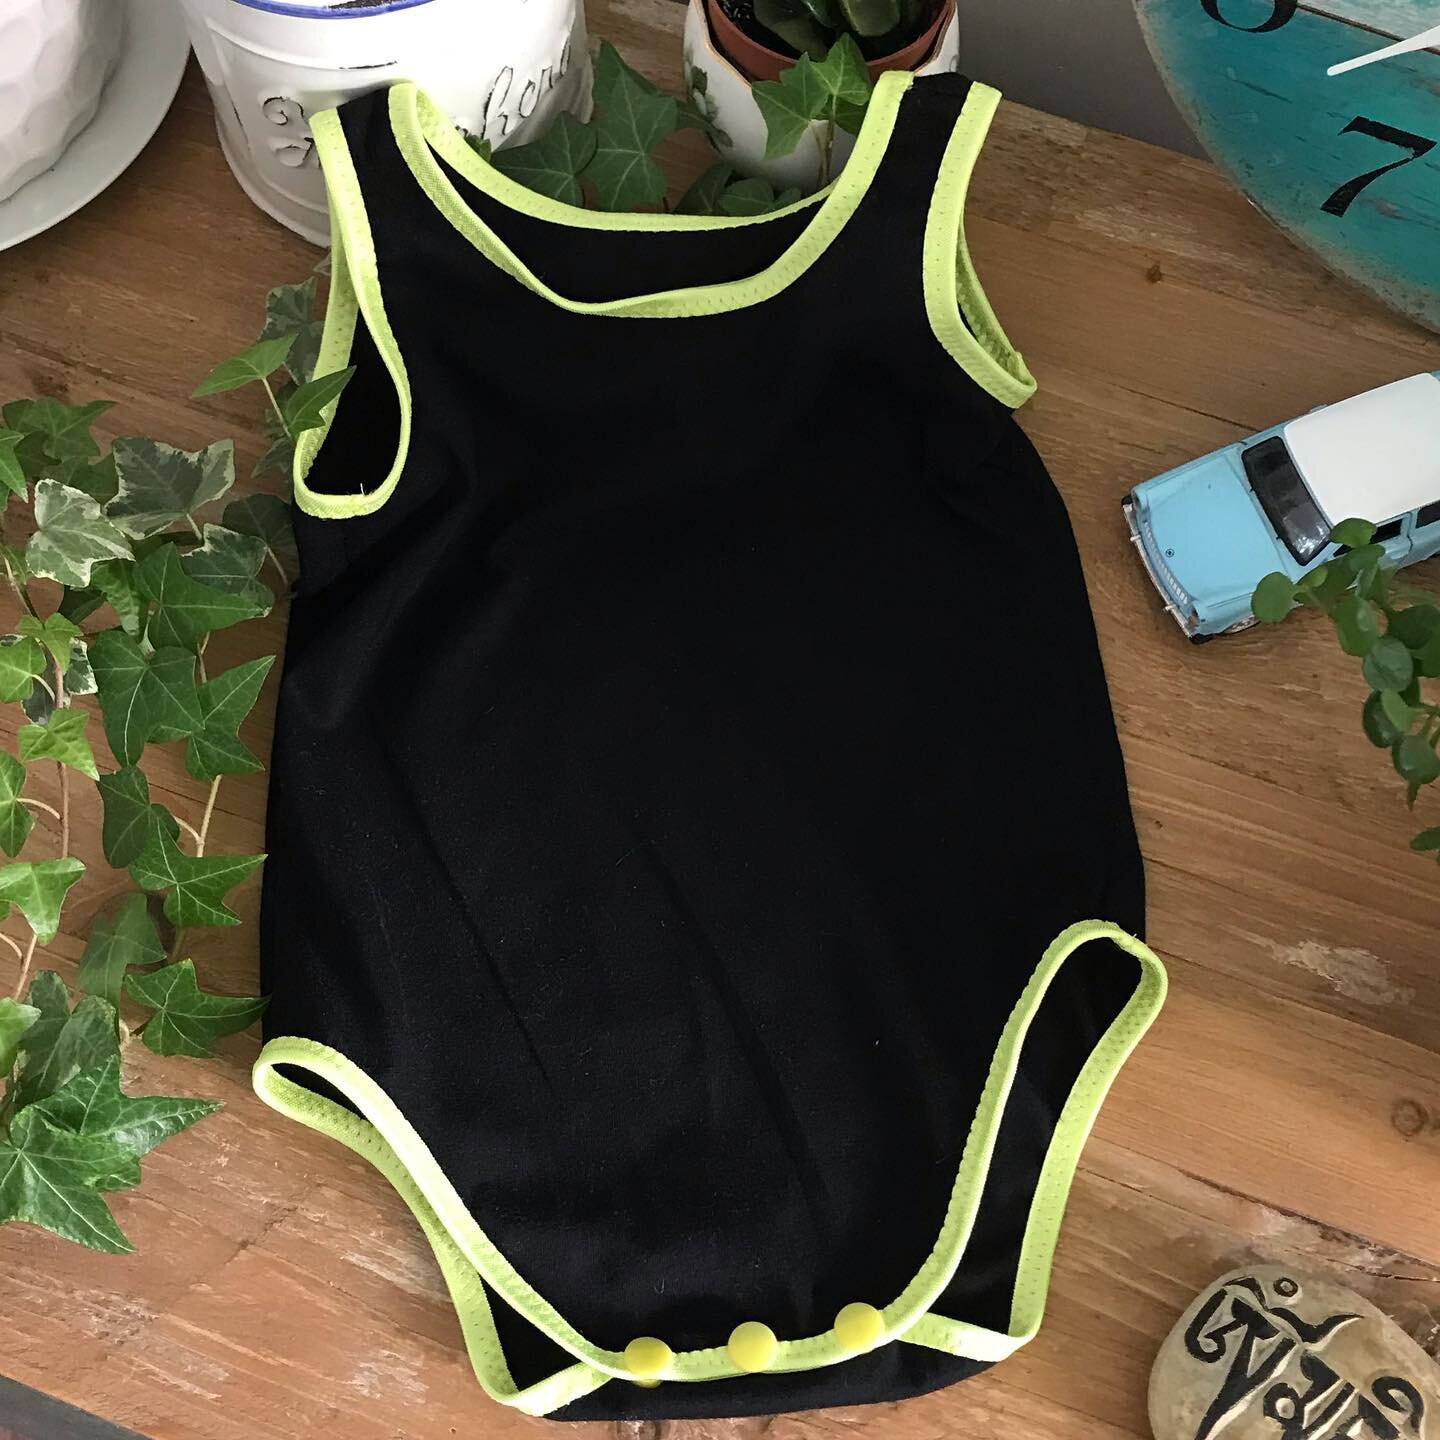 Having fun with fabrics. This is my &ldquo;working class&rdquo; tank top onesie for the wee ones. Neon yellow on black. A little unconventional but I love it. 
Available as Kit or Made to Order on my website (link in bio).

#baby #toddler #working #w